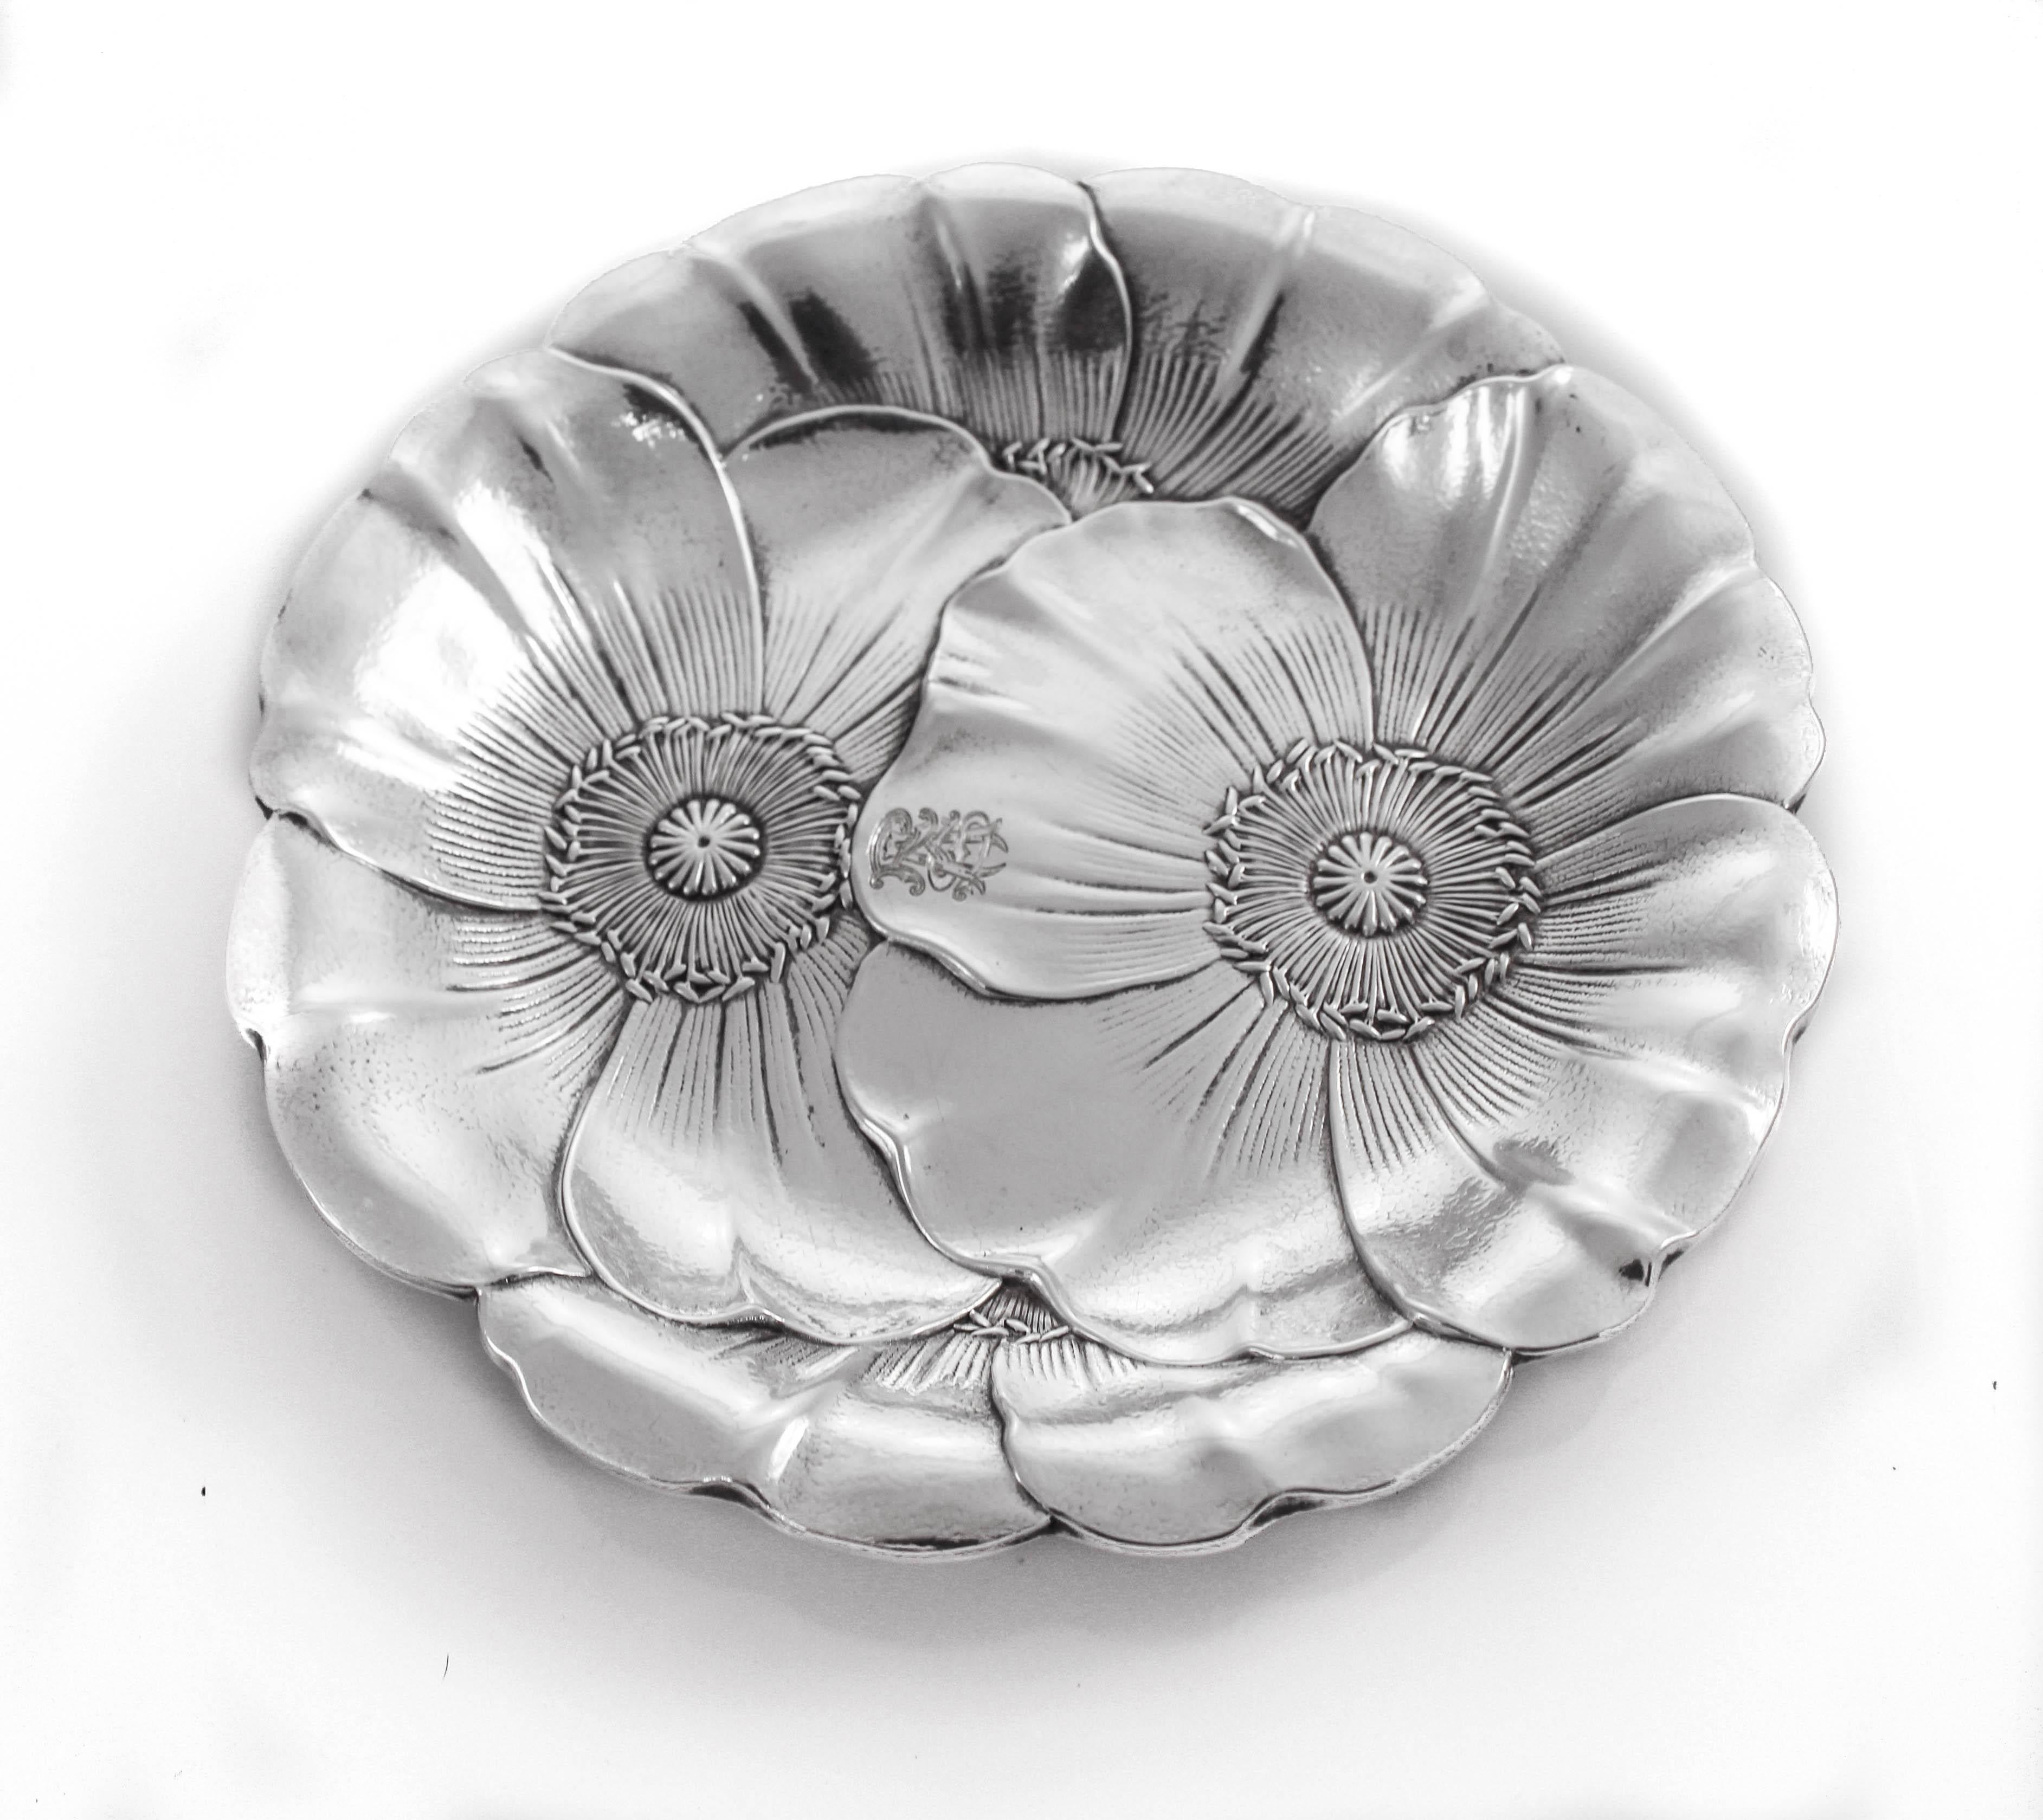 A rare set of sterling Art Nouveau dishes by Wallace Silversmiths. The Art Nouveau style was inspired by natural forms and structures, particularly the curved lines of plants and flowers. This pair of dishes are a perfect example of that style. They